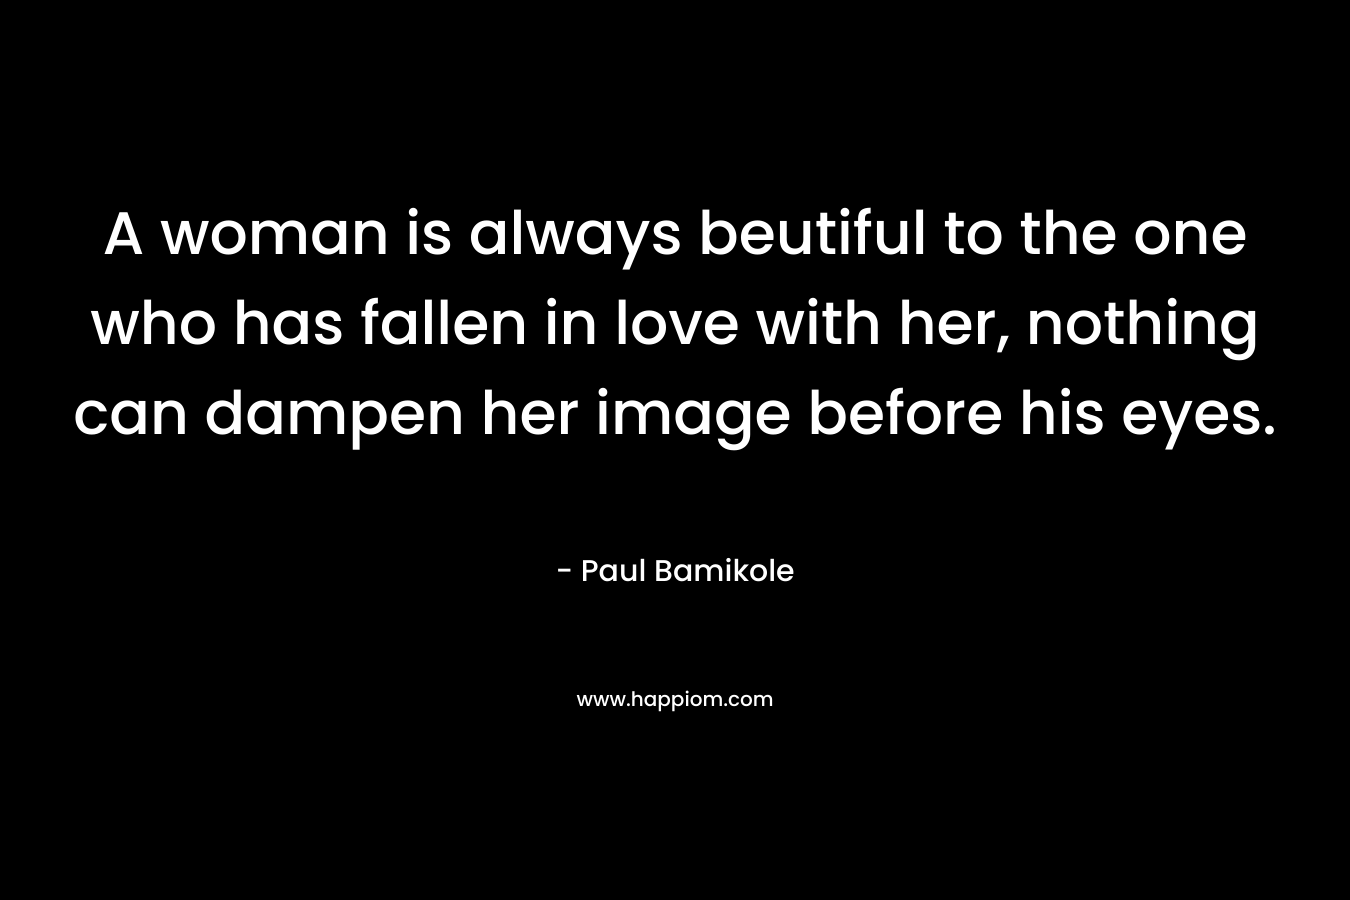 A woman is always beutiful to the one who has fallen in love with her, nothing can dampen her image before his eyes. – Paul Bamikole